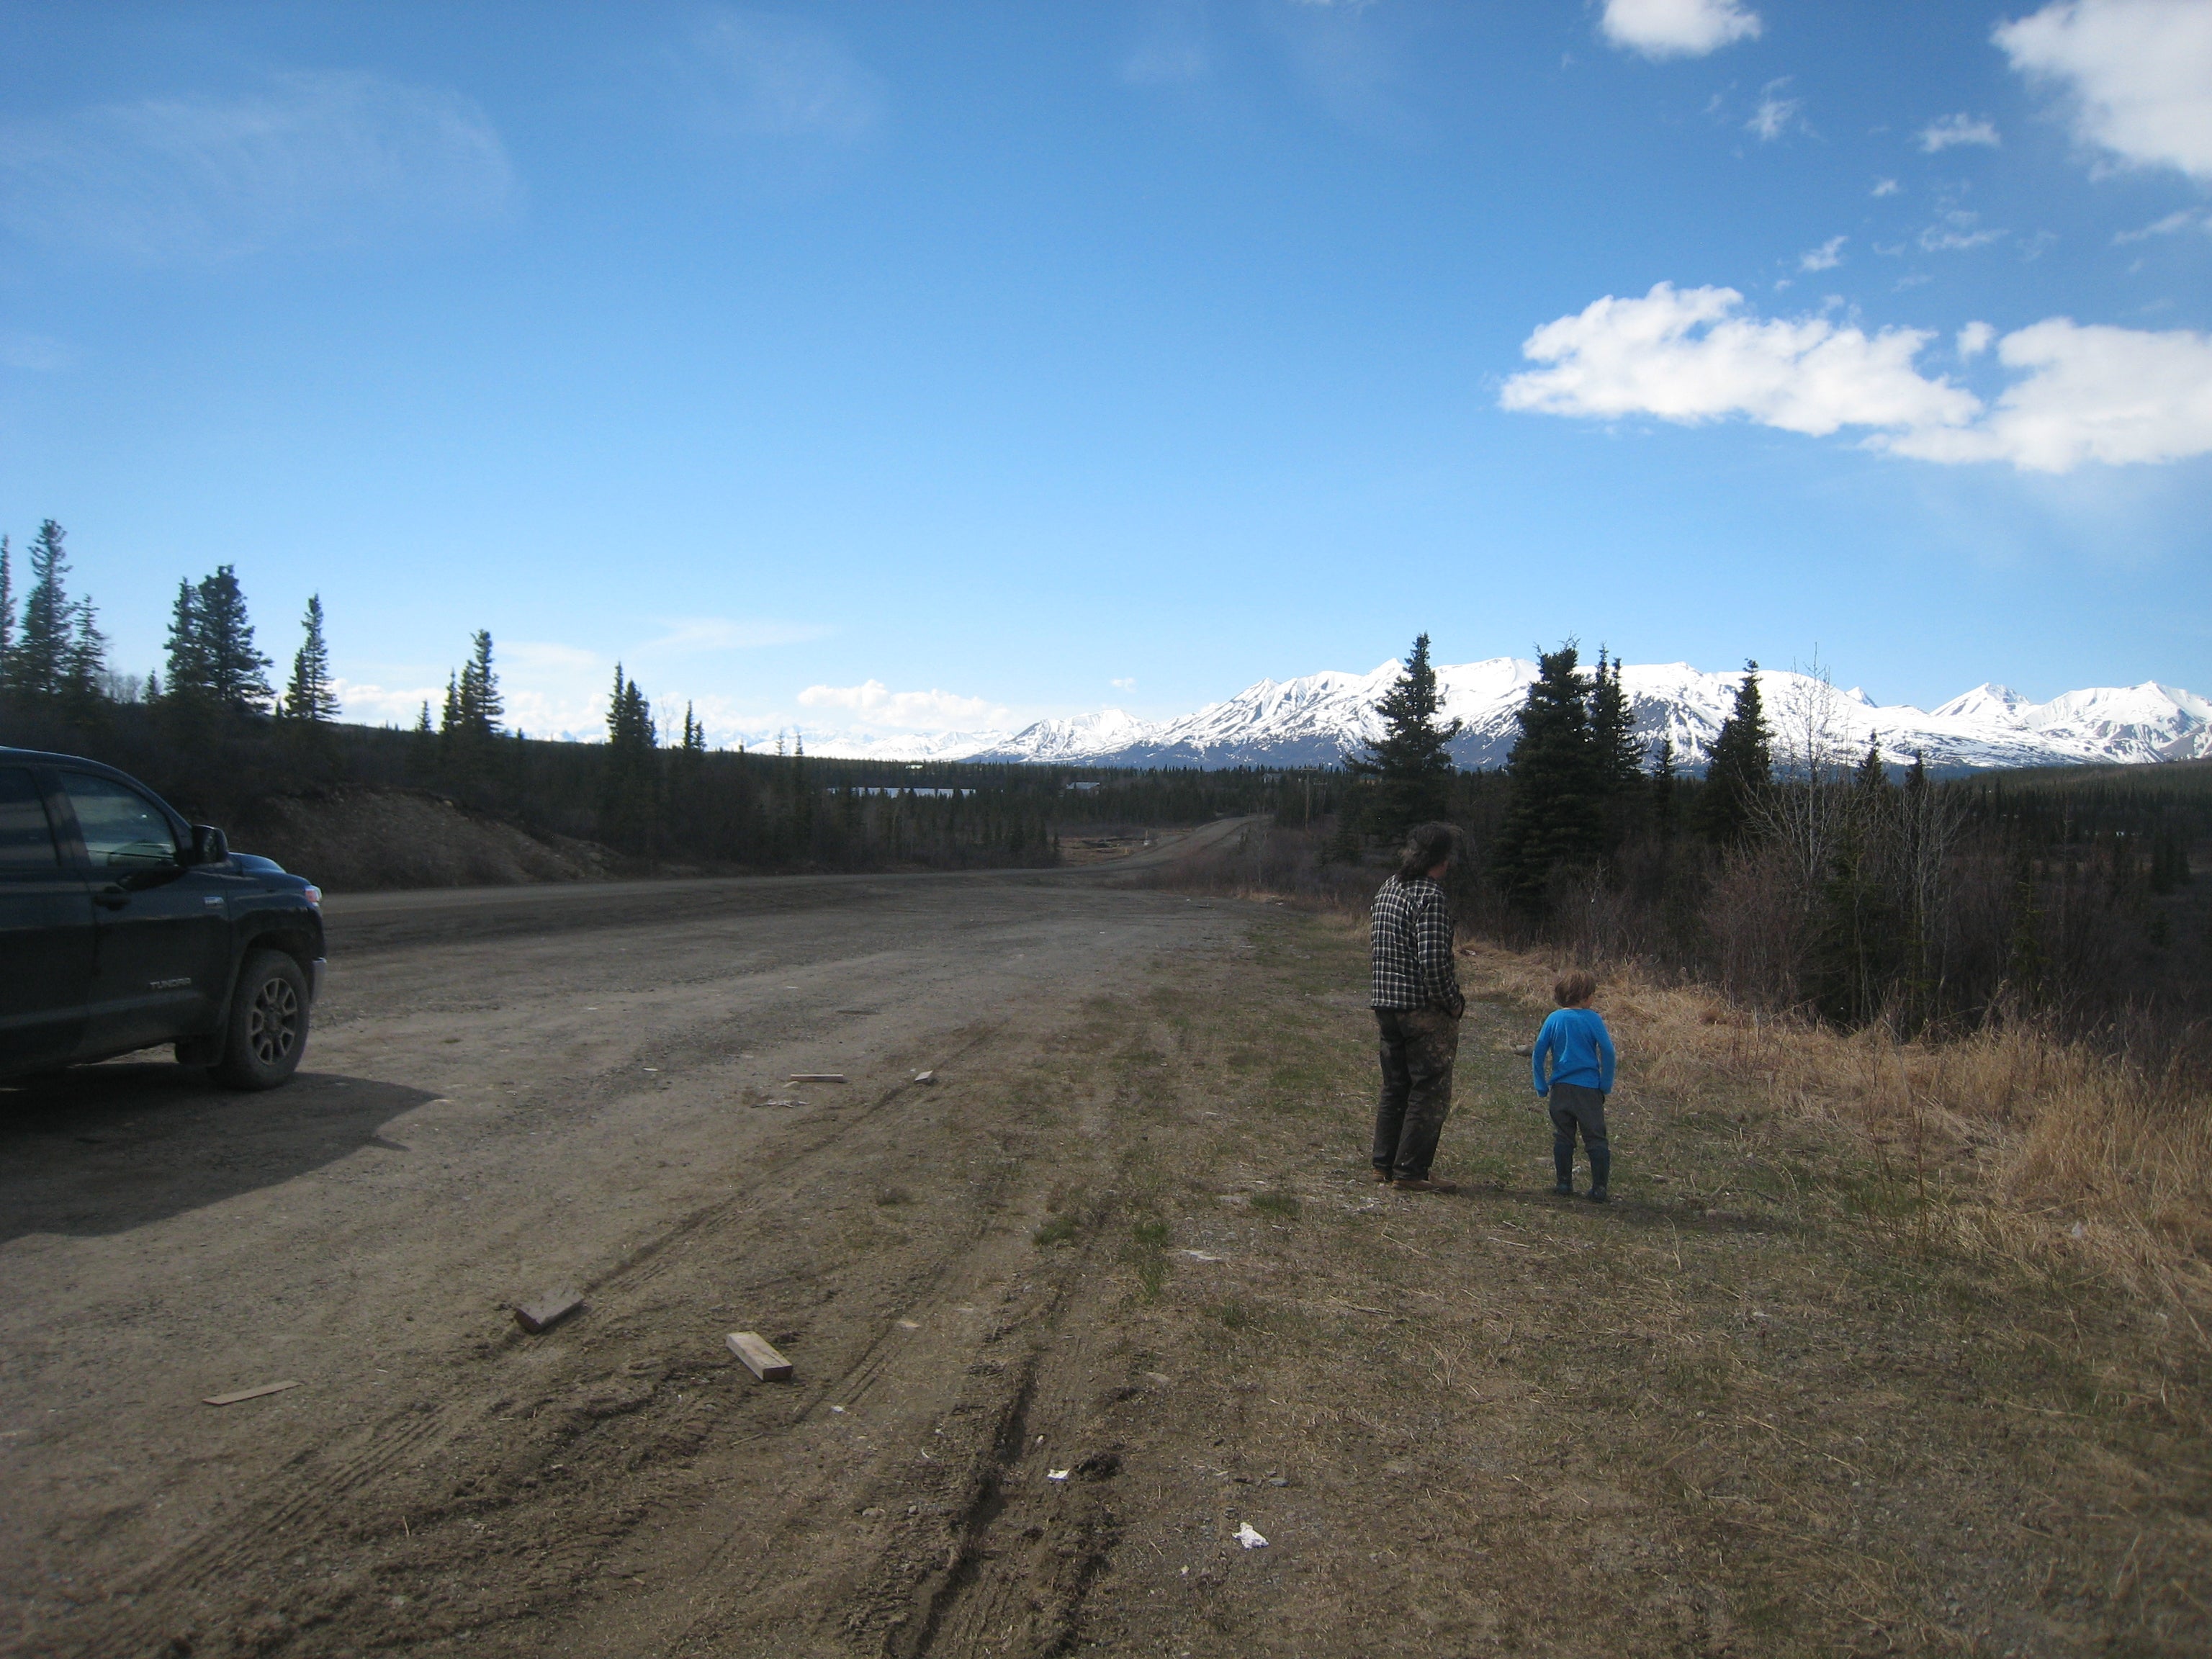 Adult and child standing on the side of a road in Alaskan landscape